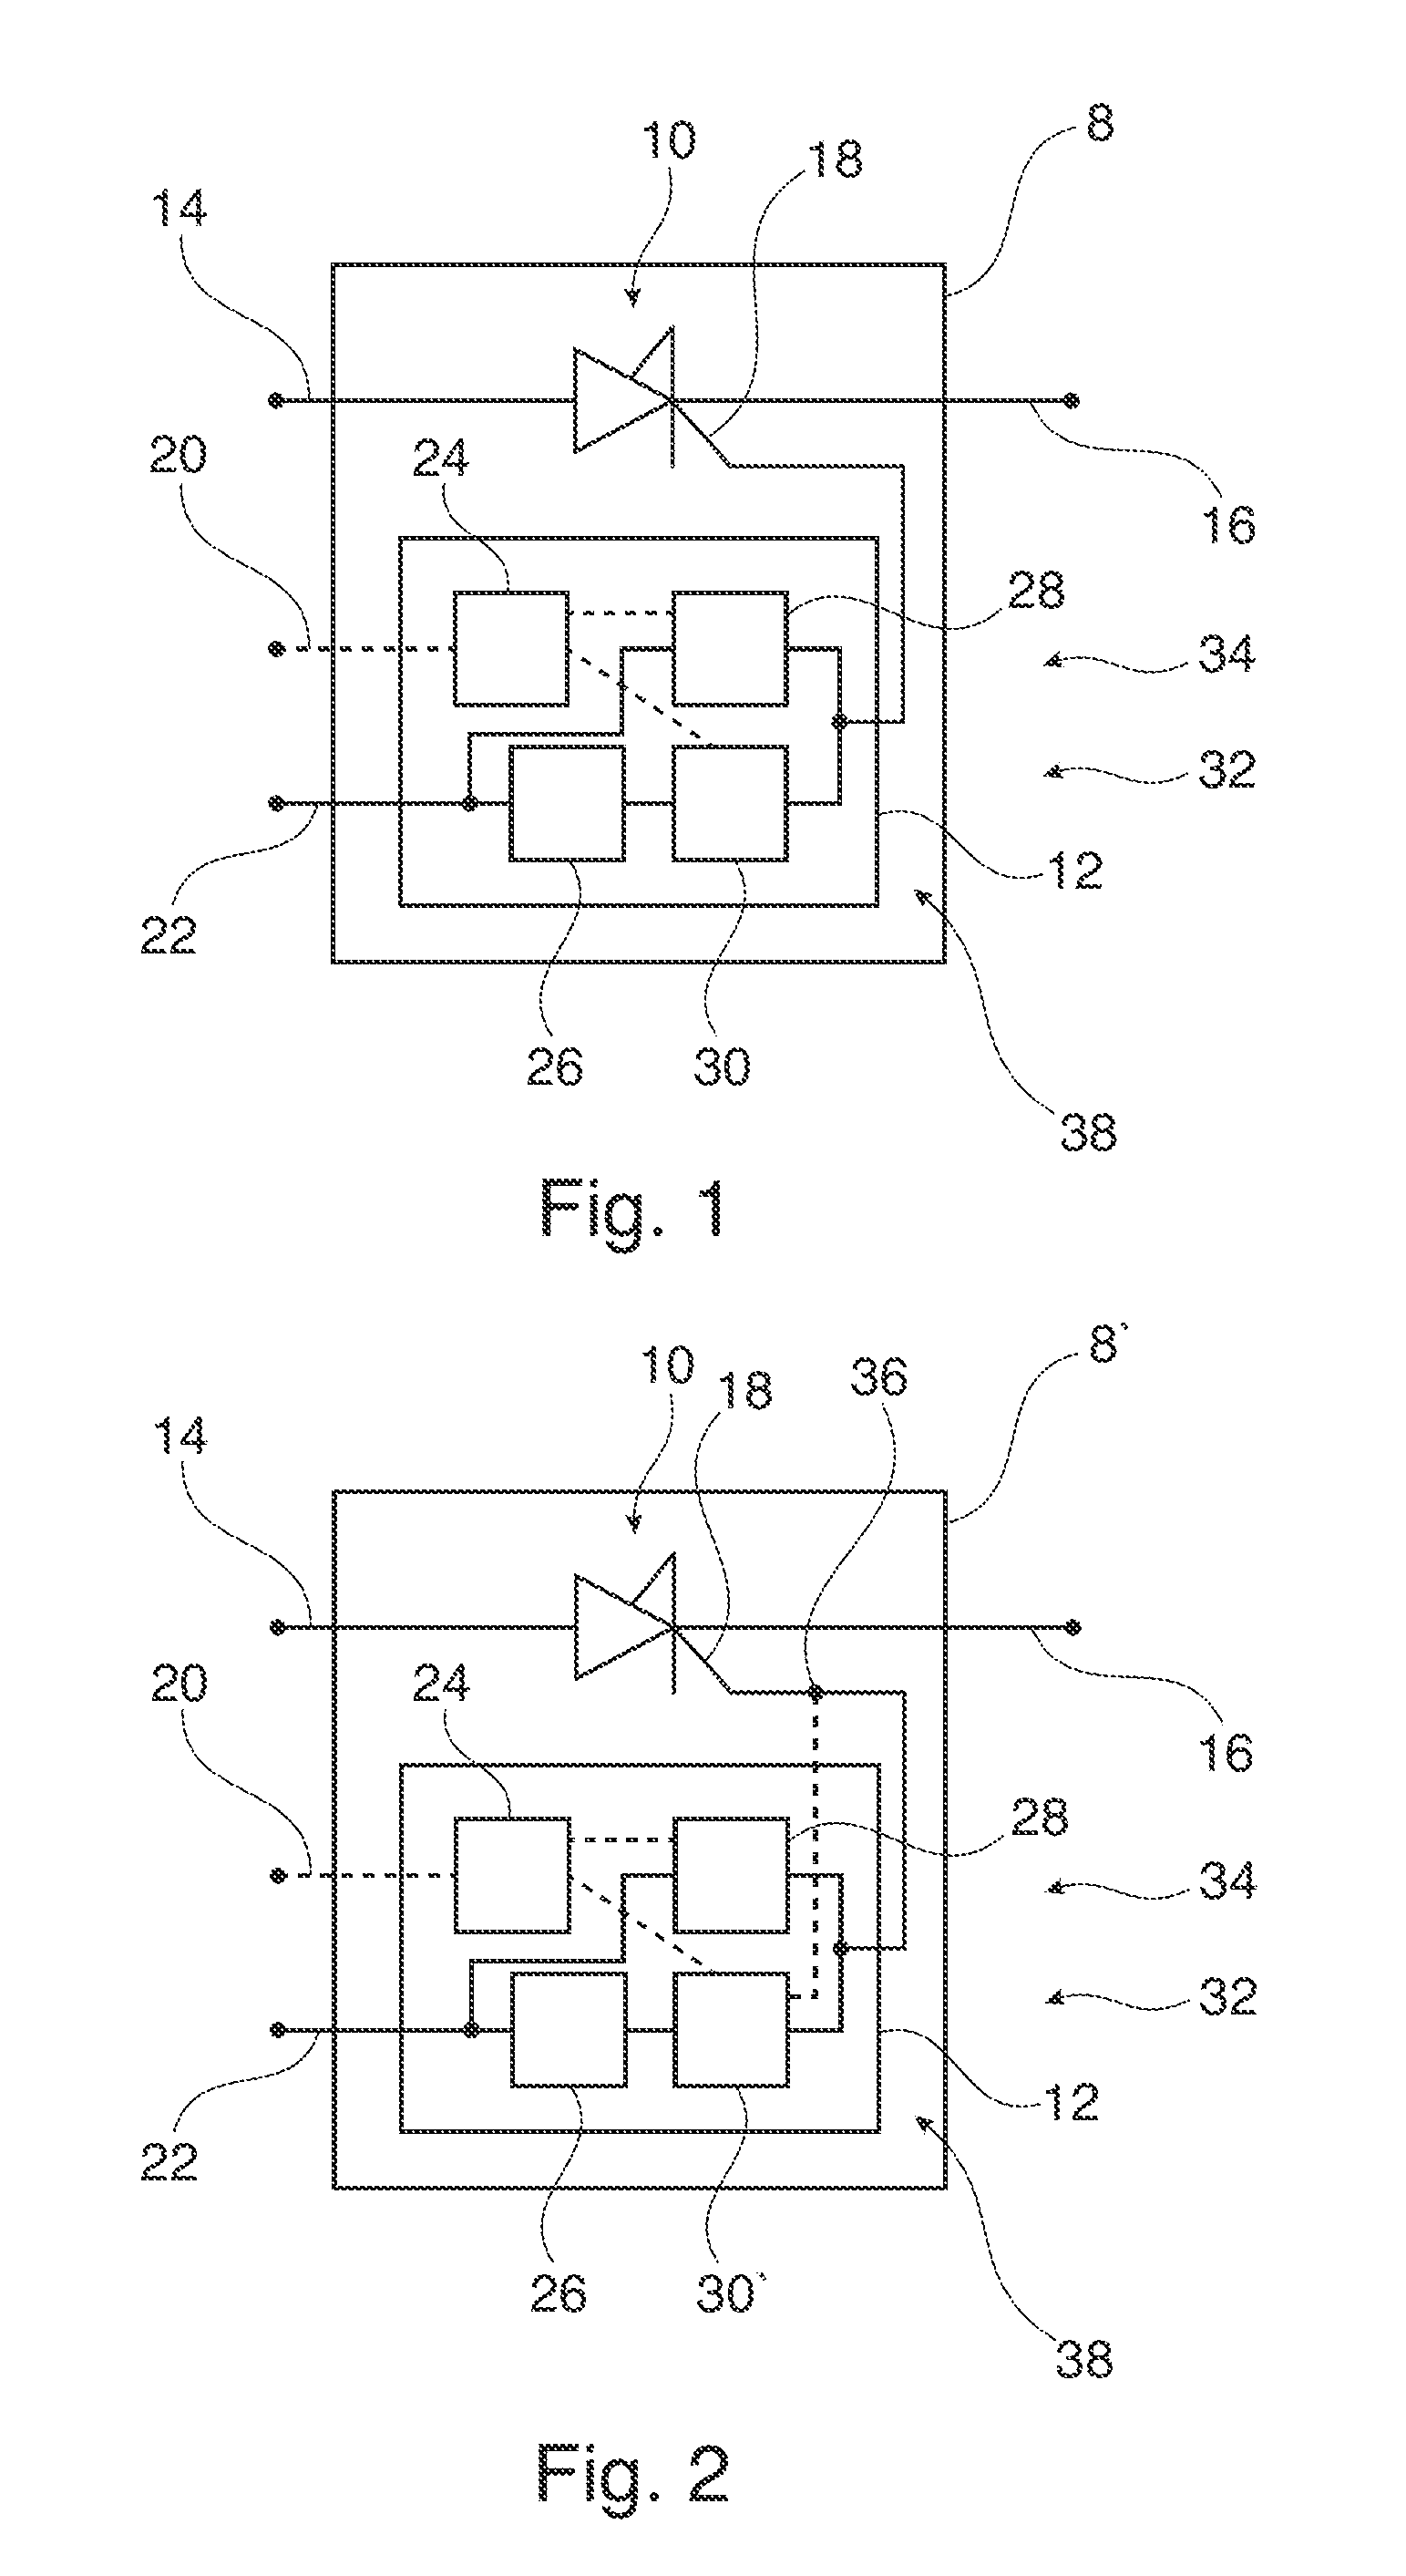 Current switching device with igct